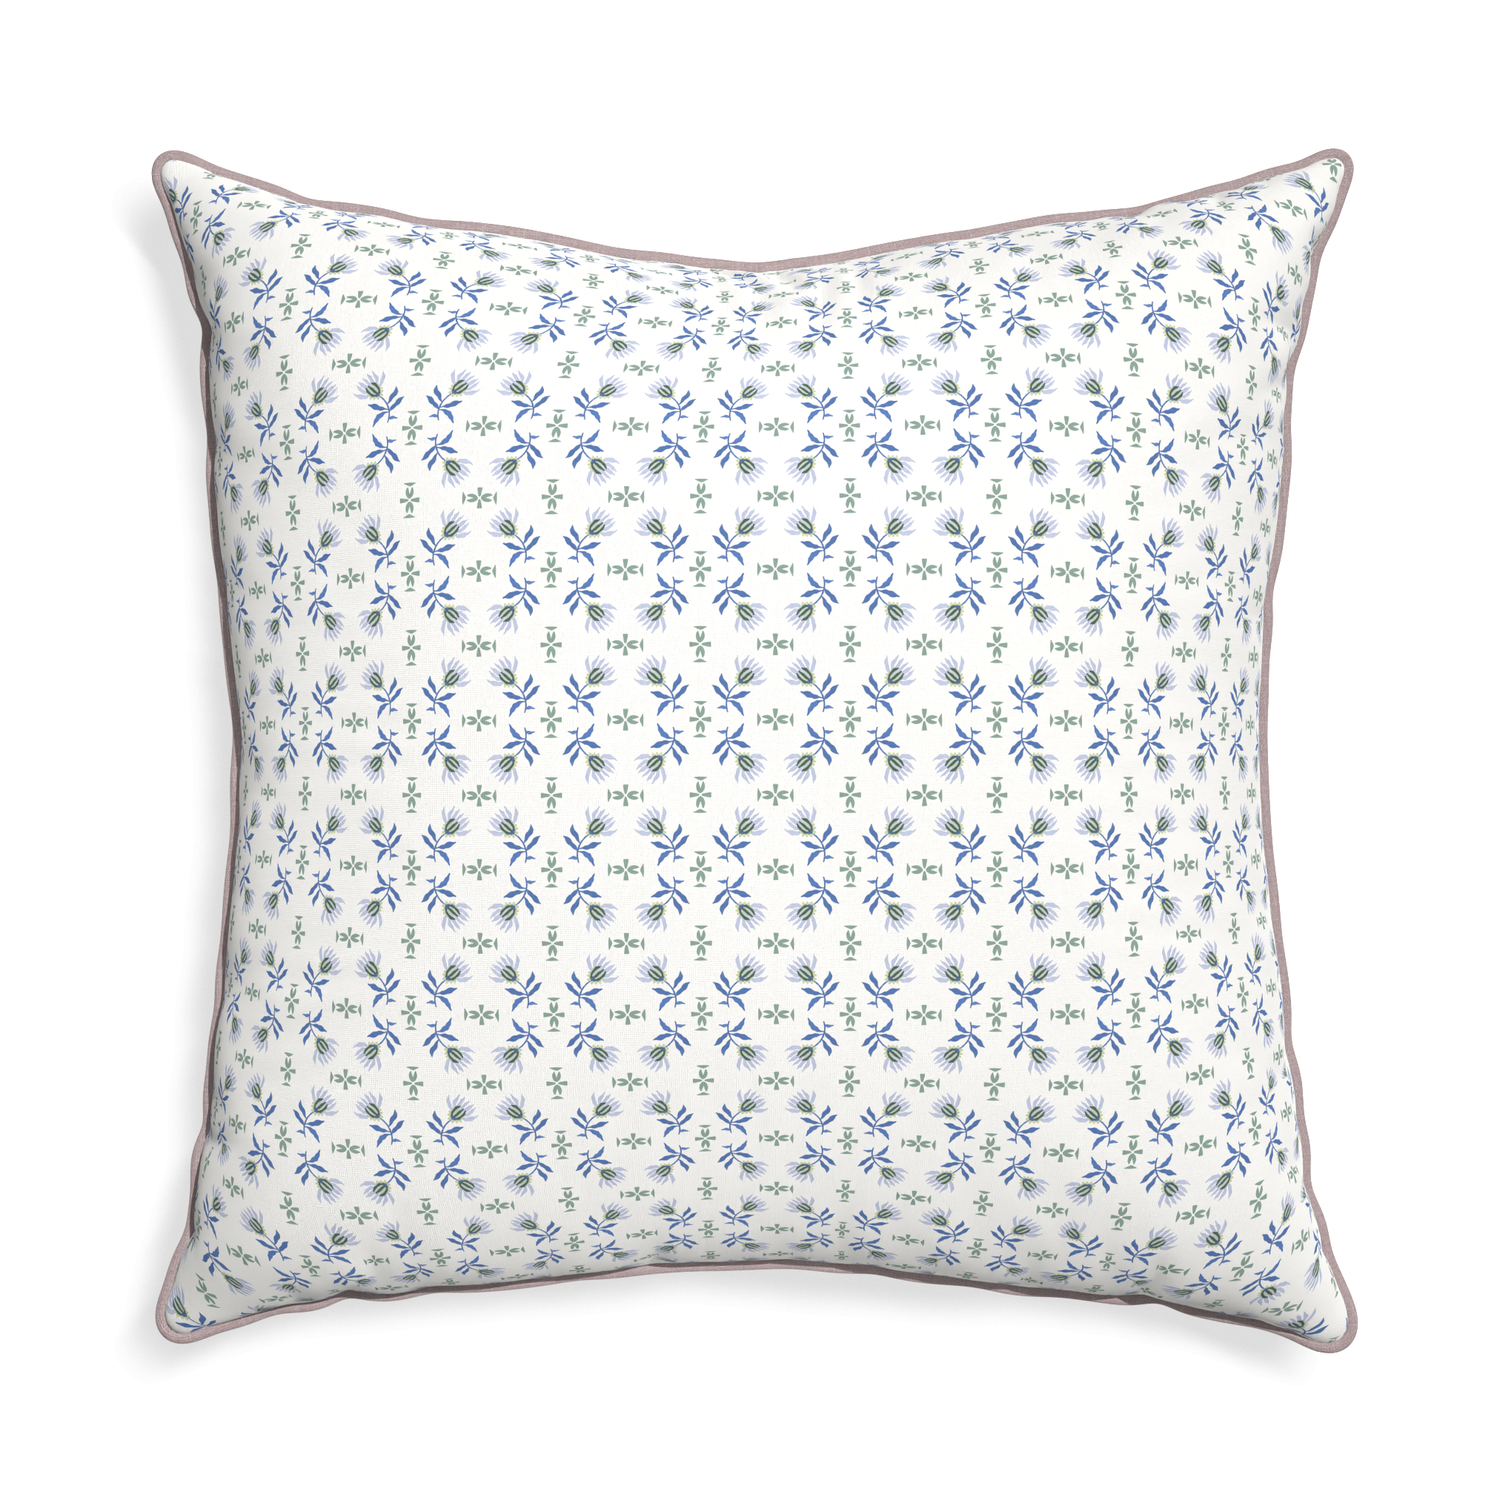 Euro-sham lee custom blue & green floralpillow with orchid piping on white background